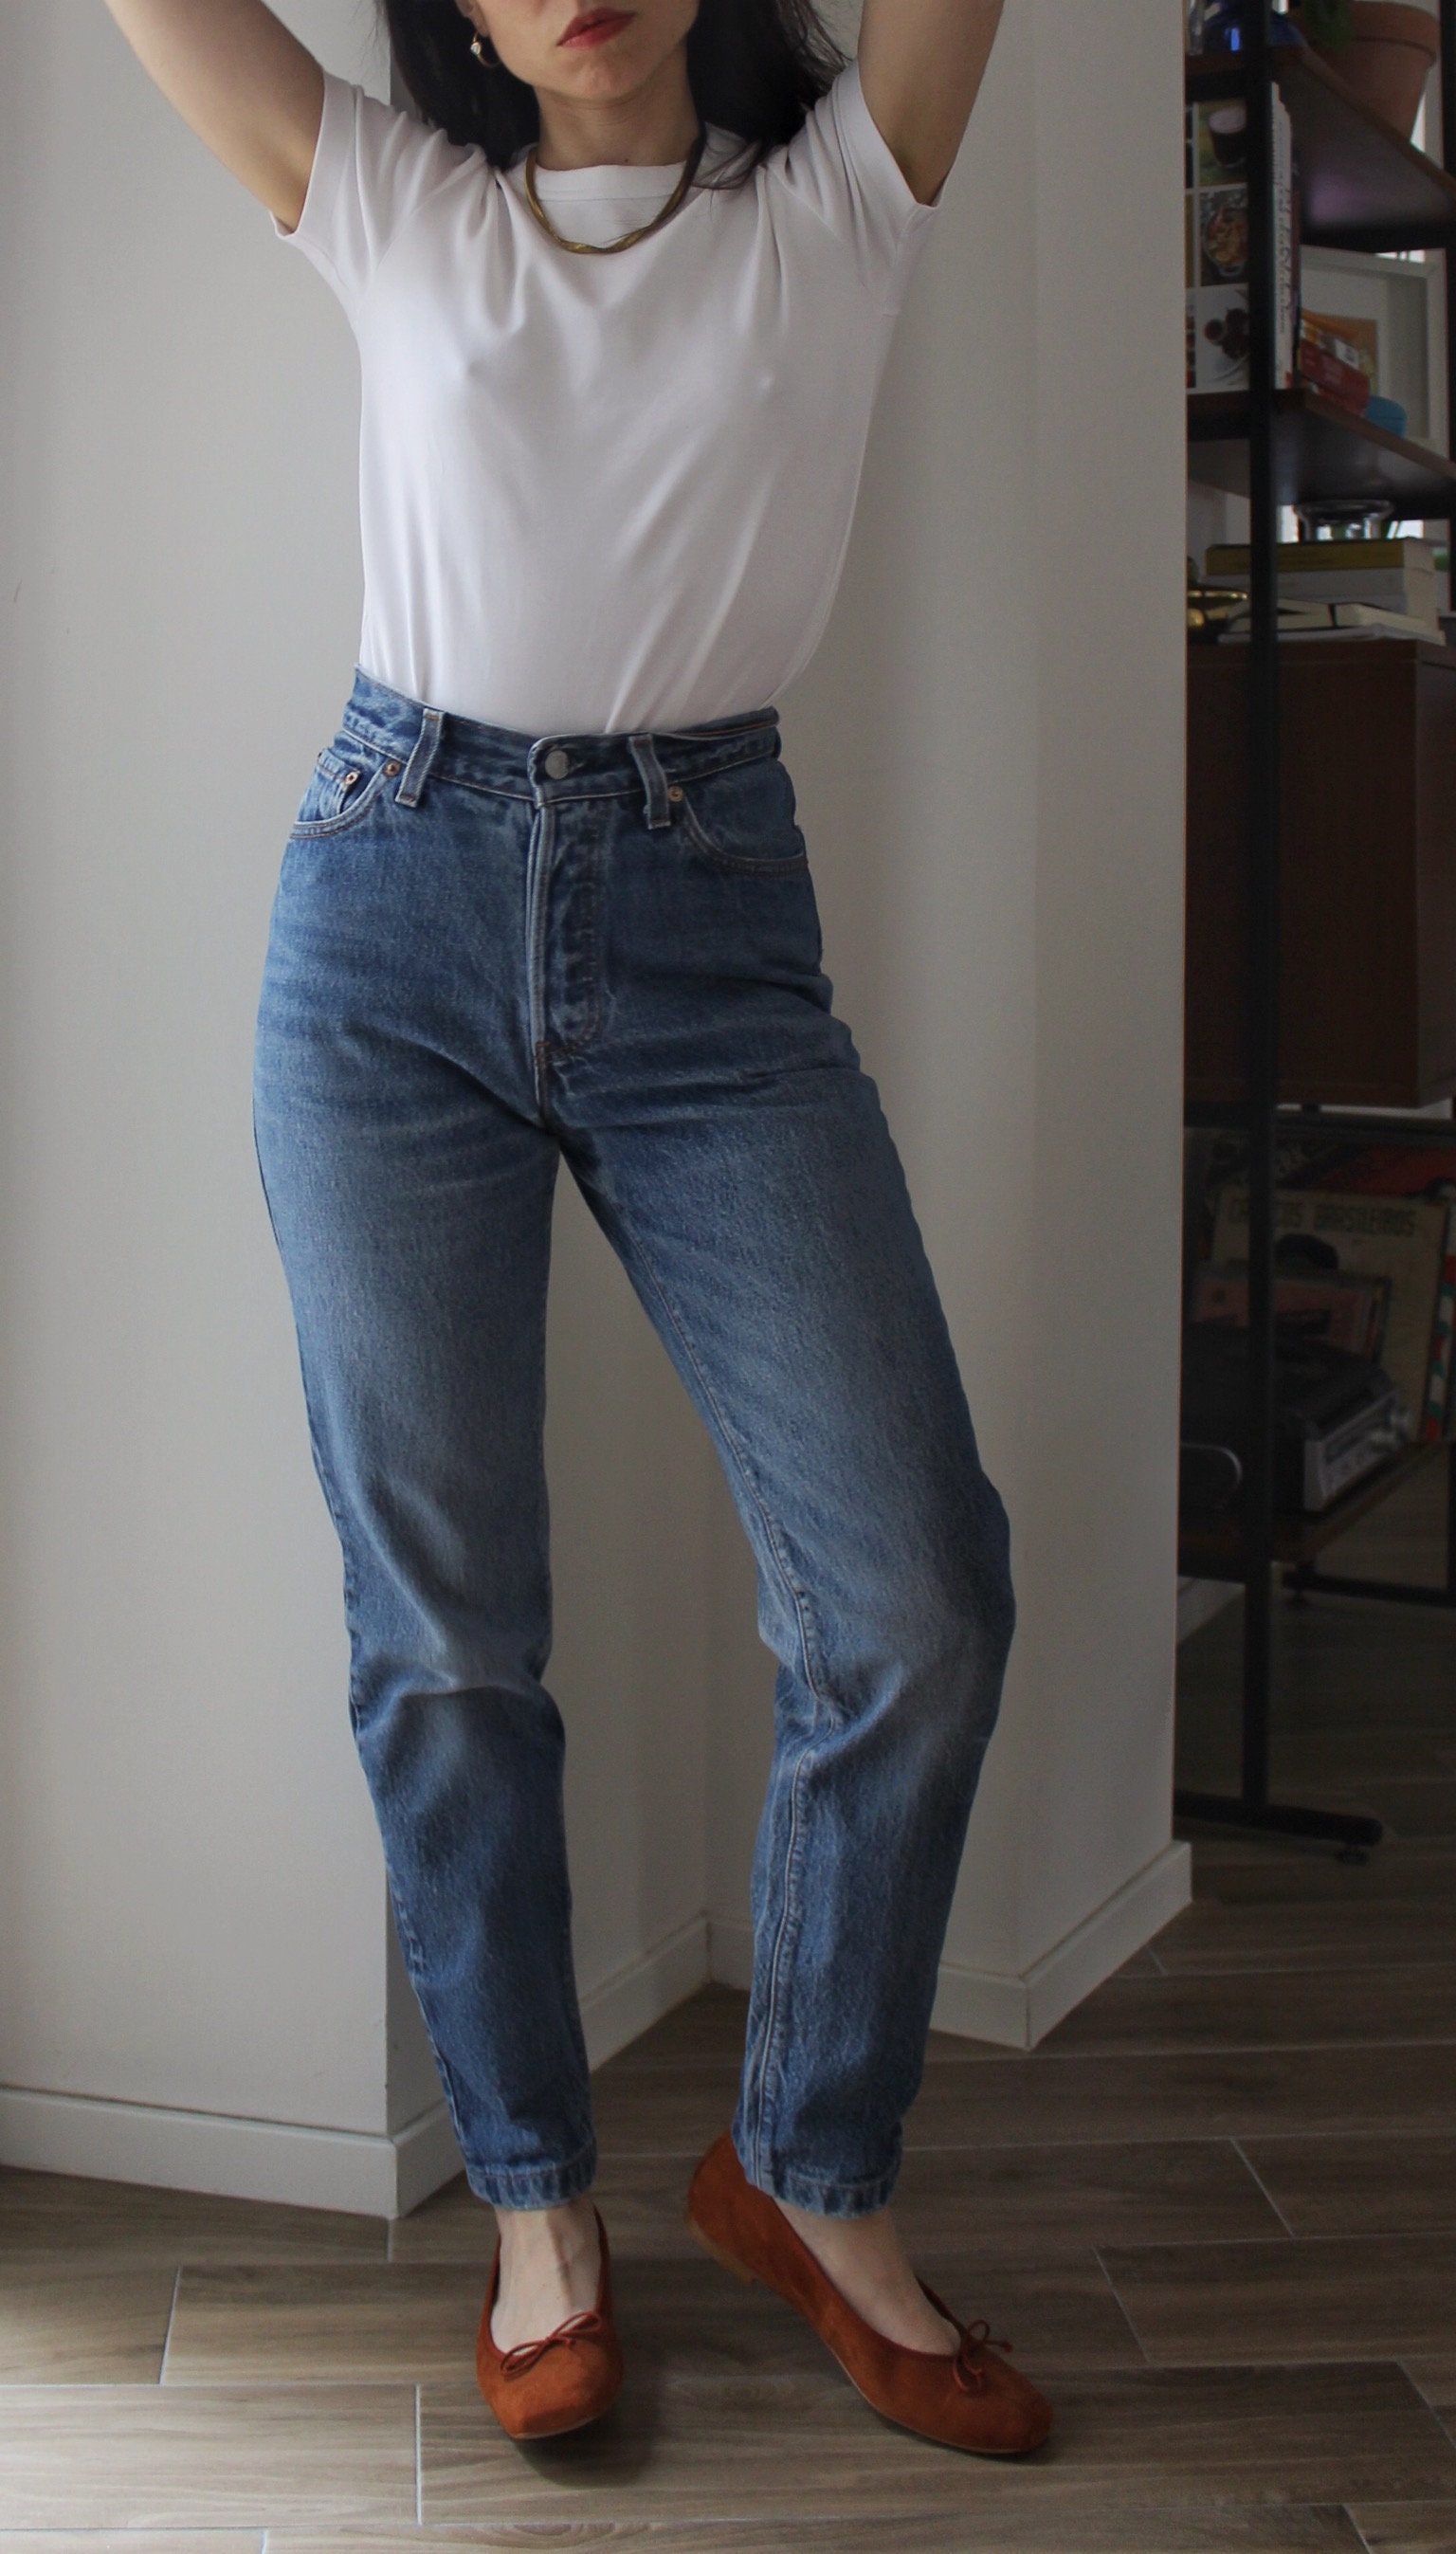 Vintage Rare 80s Levis 501 17501-0115 Made in USA Jeans W26 - Etsy